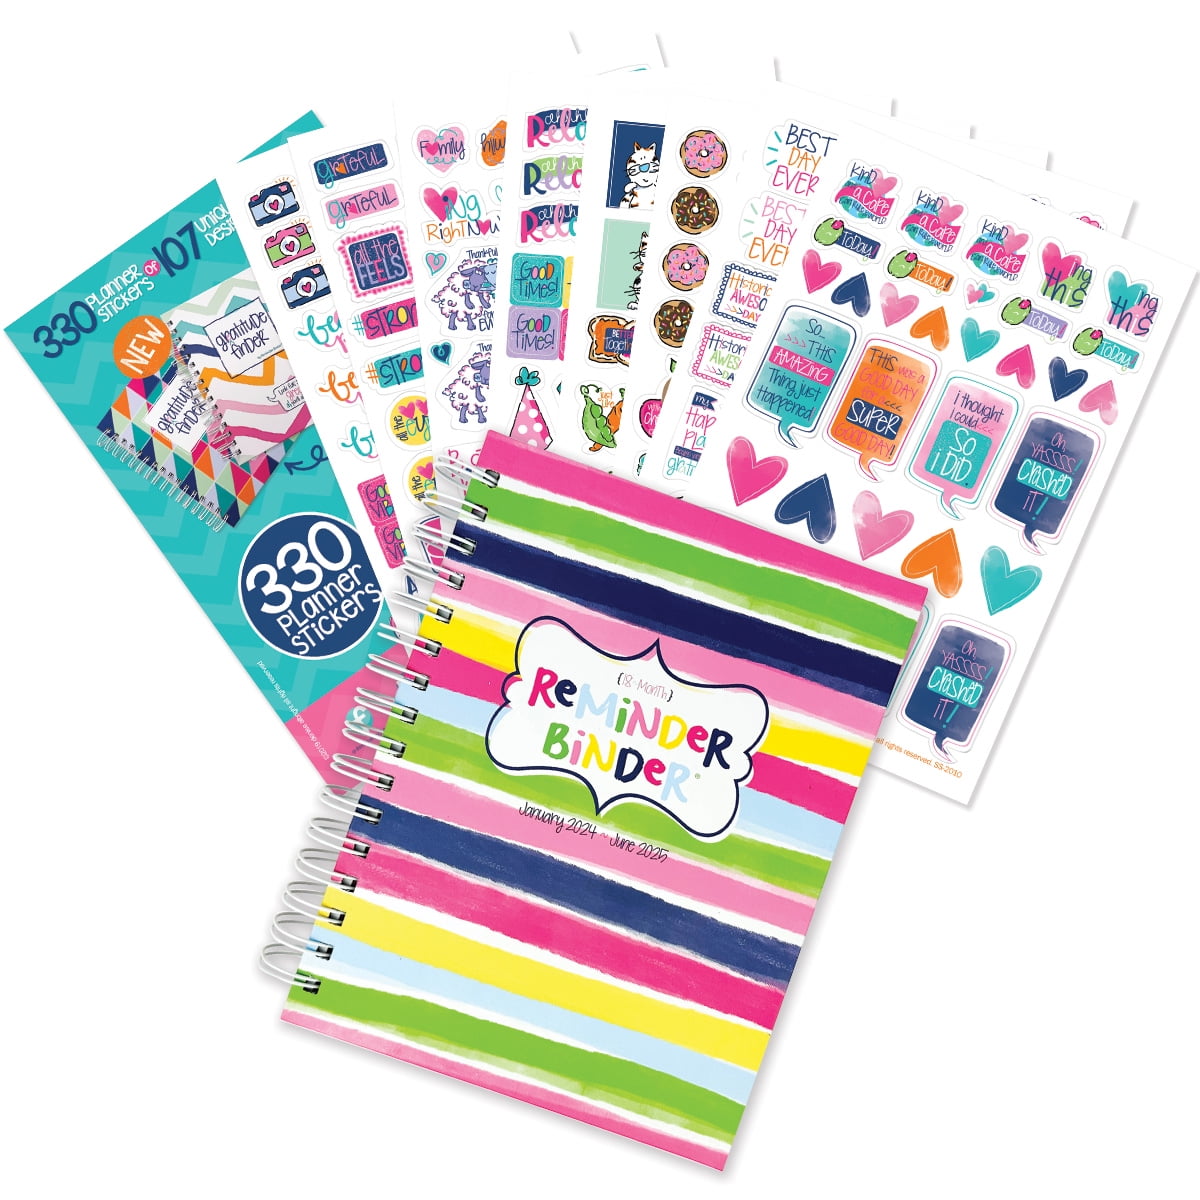 Reminder Binder 2024-2025 Planner; 18-Month Calendar with Budget Planner Stickers (Ribbons), Size: 8.5 x 7.25 x 1.25